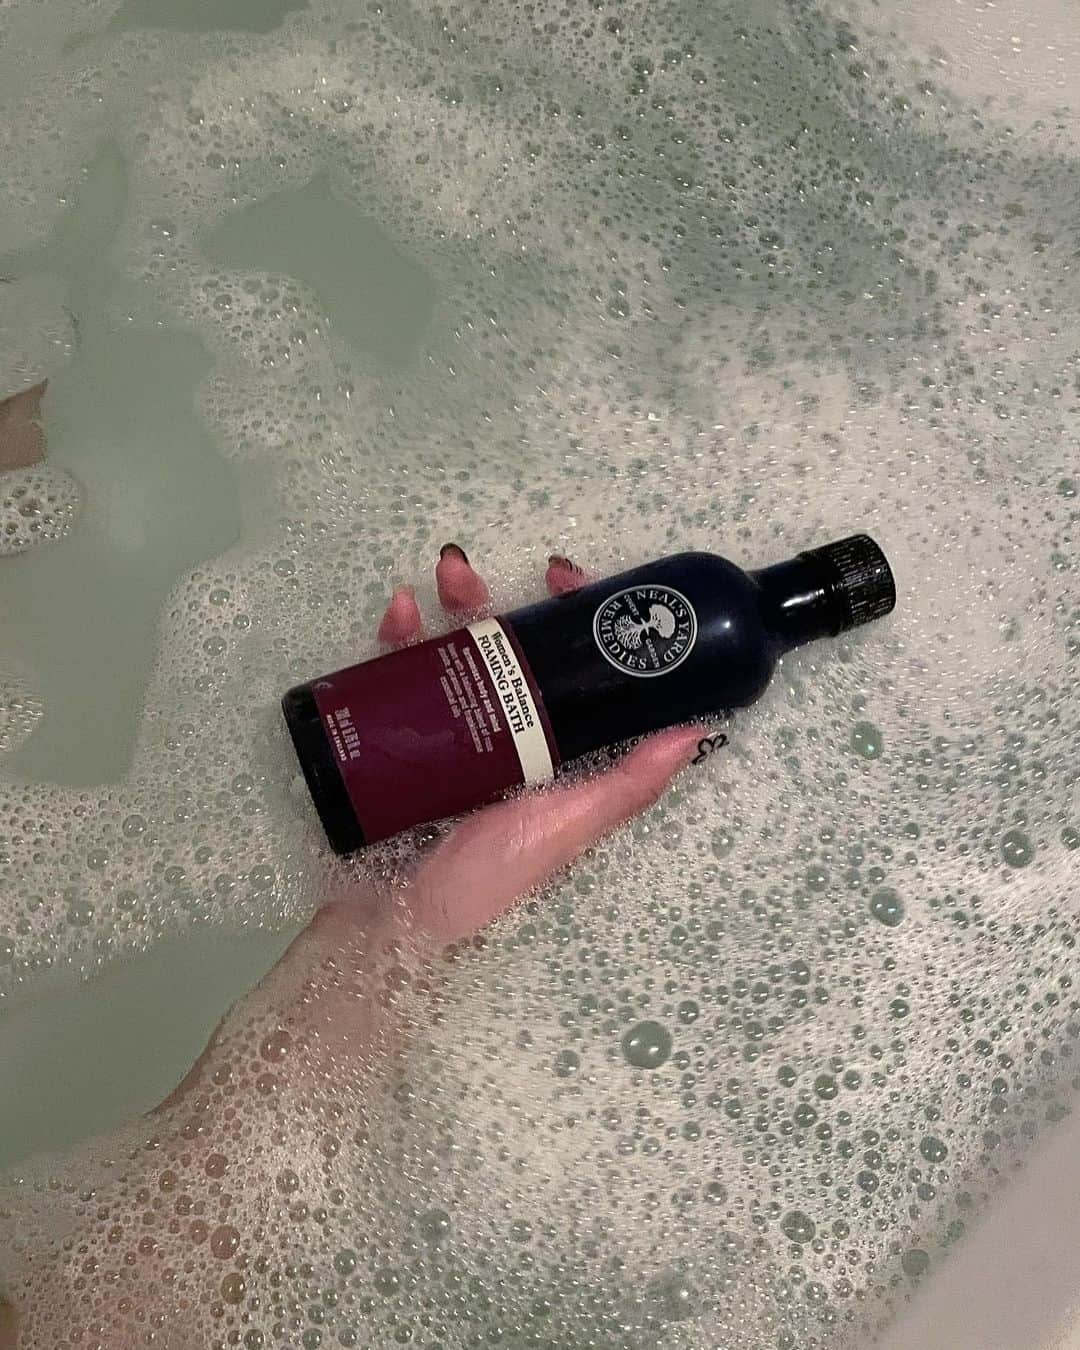 Neal's Yard Remediesのインスタグラム：「It's a Women's Balance kind of #SundaySoak 🛁 🧼 ⁠ ⁠ Gentle and conditioning, our Women’s Balance Foaming Bath is expertly formulated with mild plant-based cleansers and our best-selling Women’s Balance Aromatherapy Blend. Perfect for dry skin in need of a little TLC, this aromatherapeutic bath foam relaxes as it leaves skin nourished, soft, and healthy-looking.⁠ ⁠ ✨Conditions and relaxes⁠ ✨Harmonises body and mind⁠ ✨With aloe vera and glycerine⁠ ✨Certified COSMOS natural⁠ ✨Vegan approved⁠ ⁠ Tap to shop this product.⁠ ⁠ 📸@ting_77777」